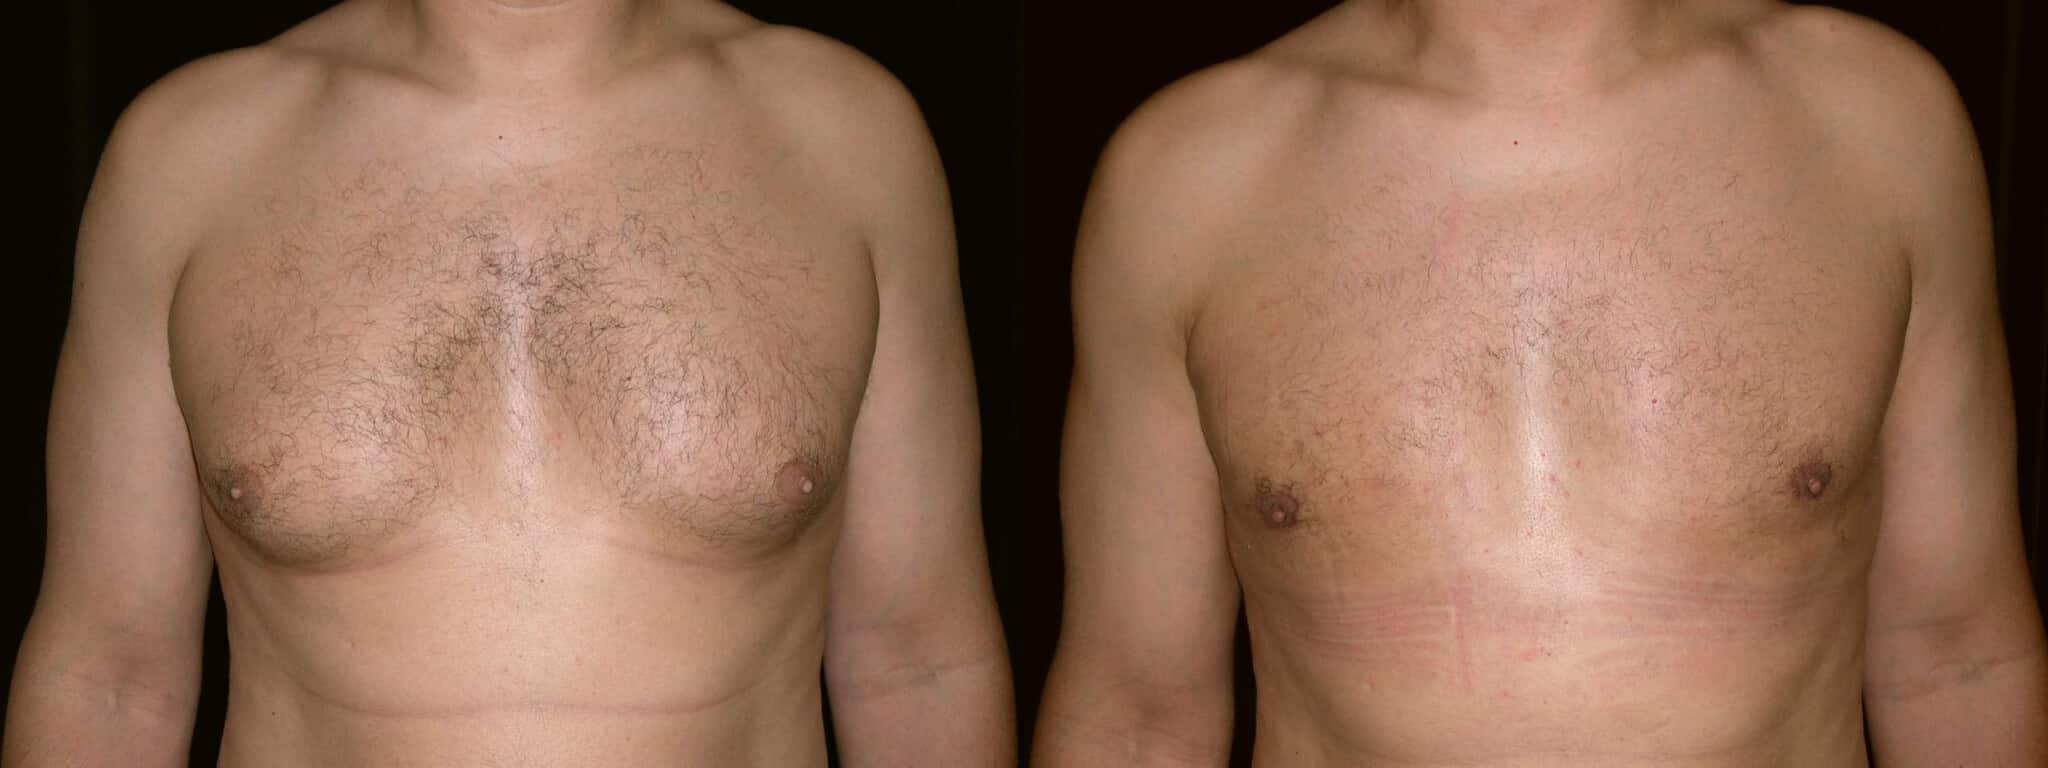 Gynecomastia Patient 9 Before & After